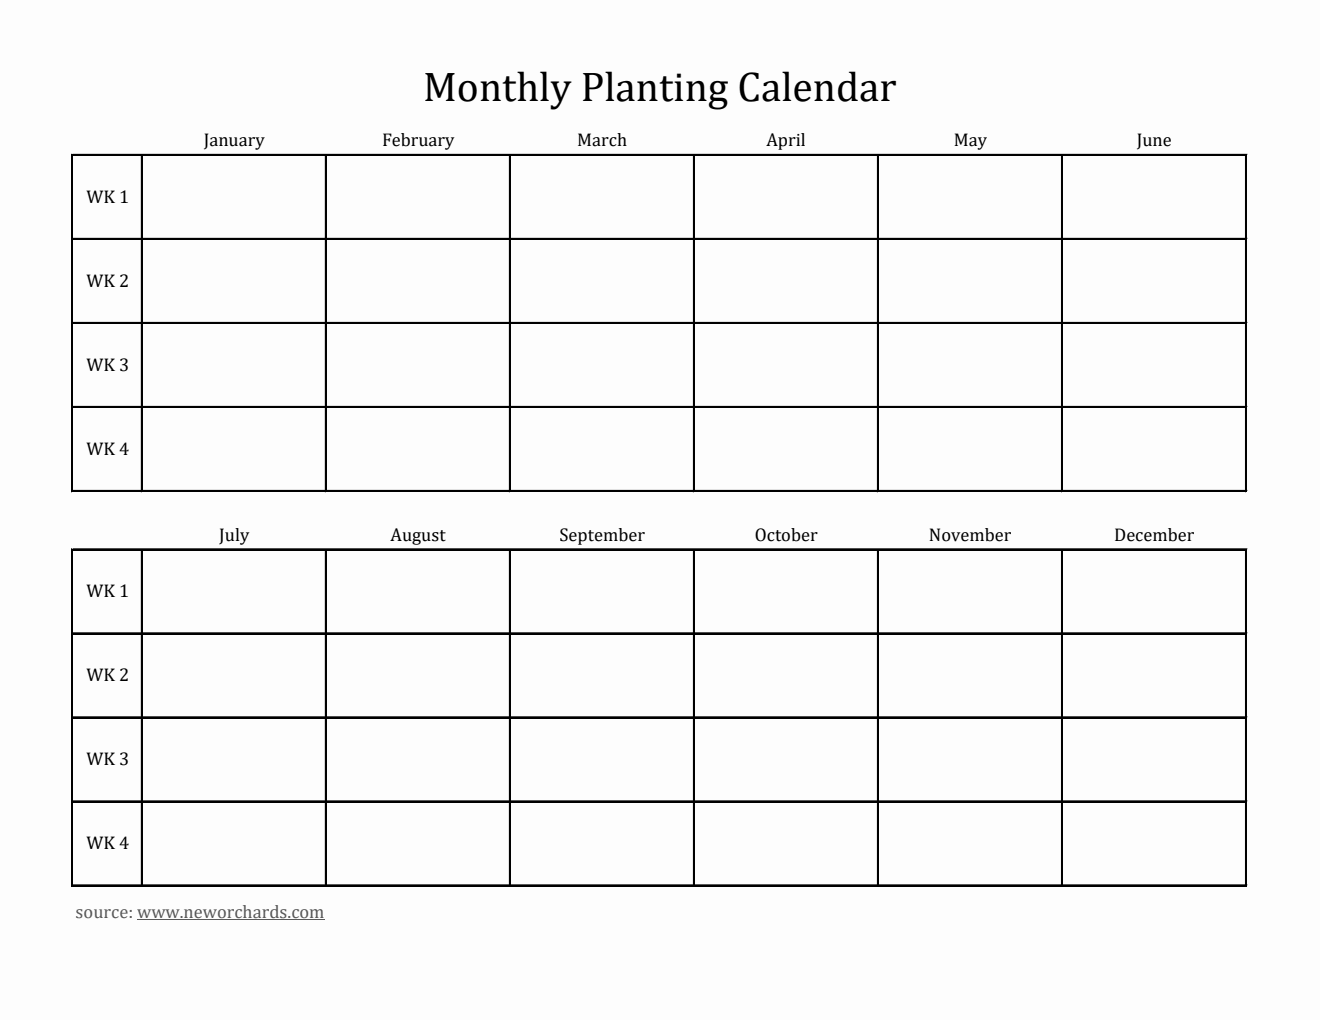 Blank Monthly Planting Calendar in Excel